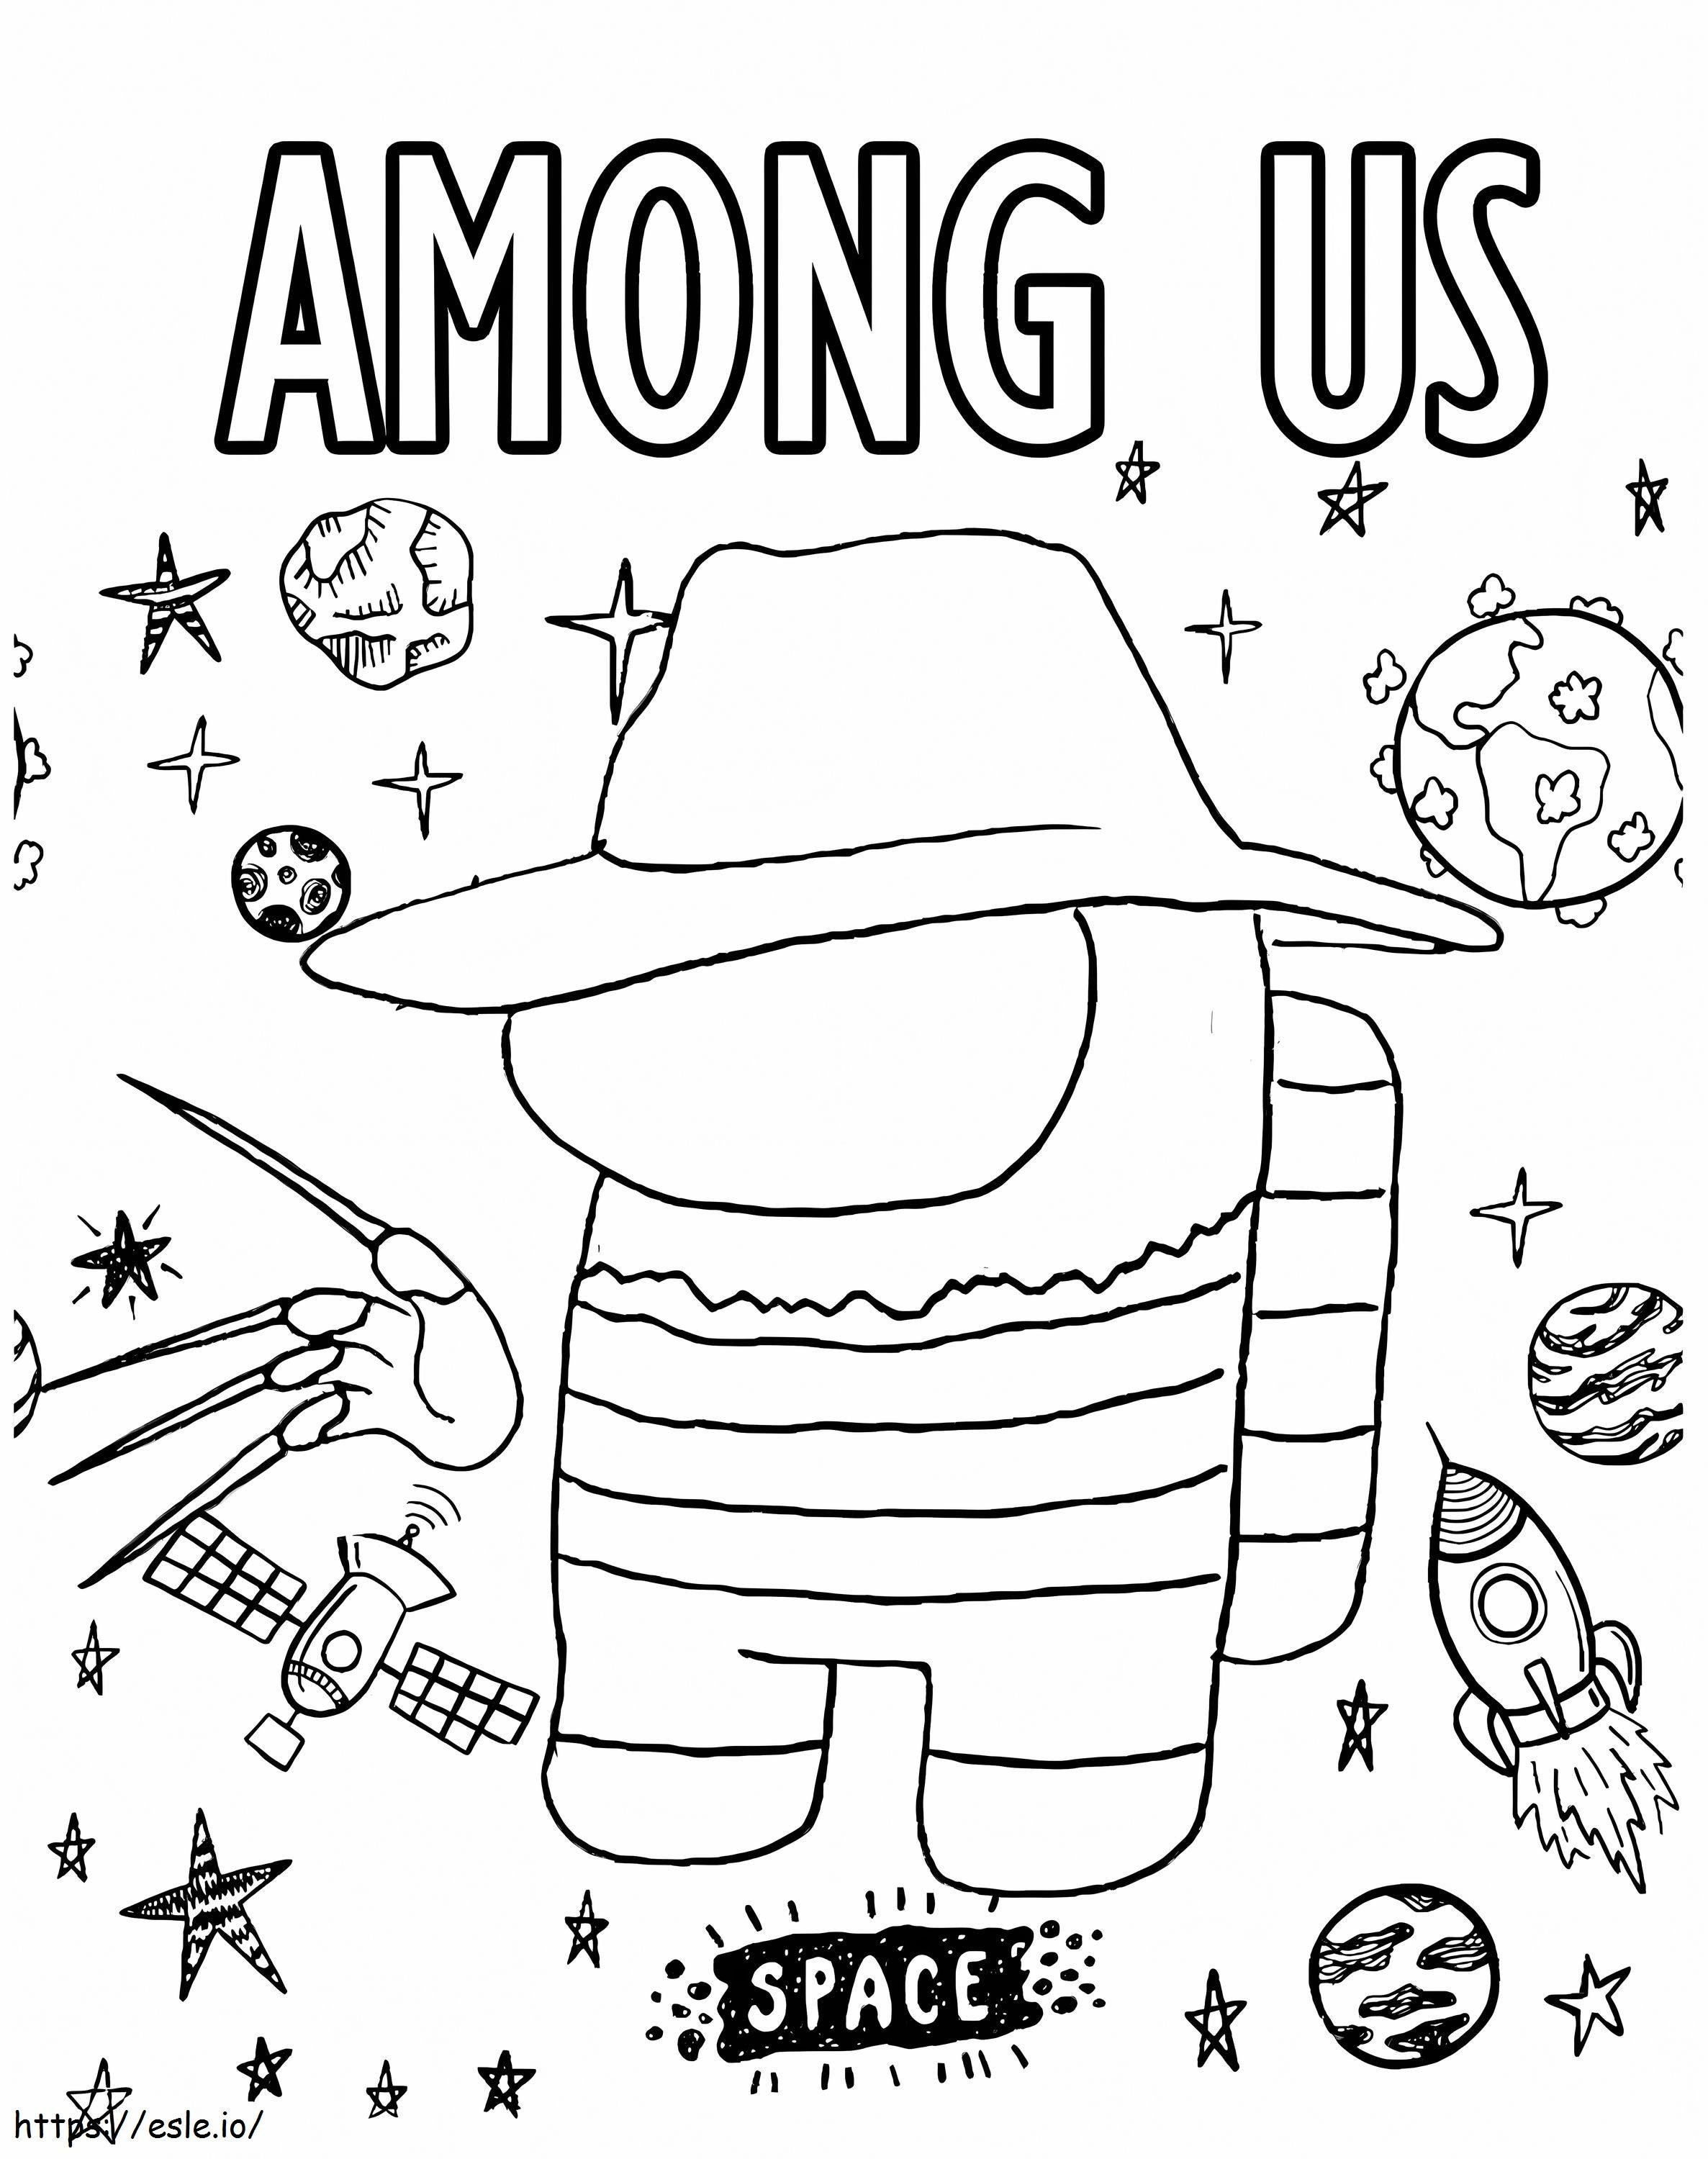 Among Us Freddy Krueger 1 coloring page